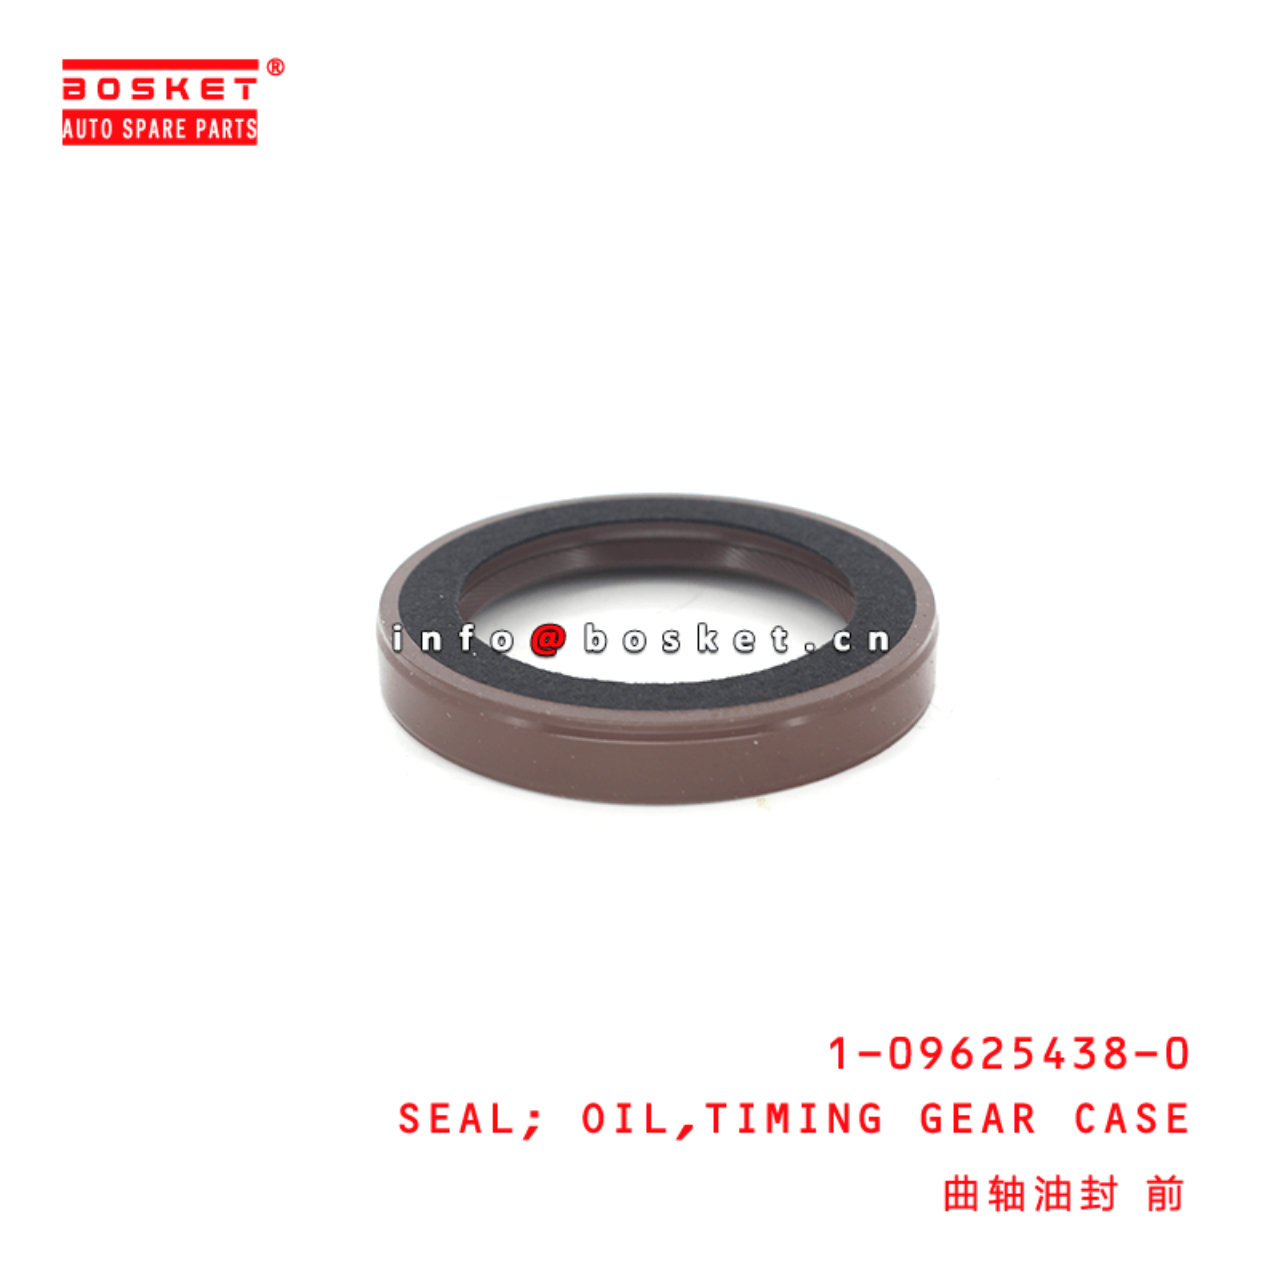 1-09625438-0 Timing Gear Case Oil Seal 1096254380 Suitable for ISUZU NMR 4BD1 6BD1